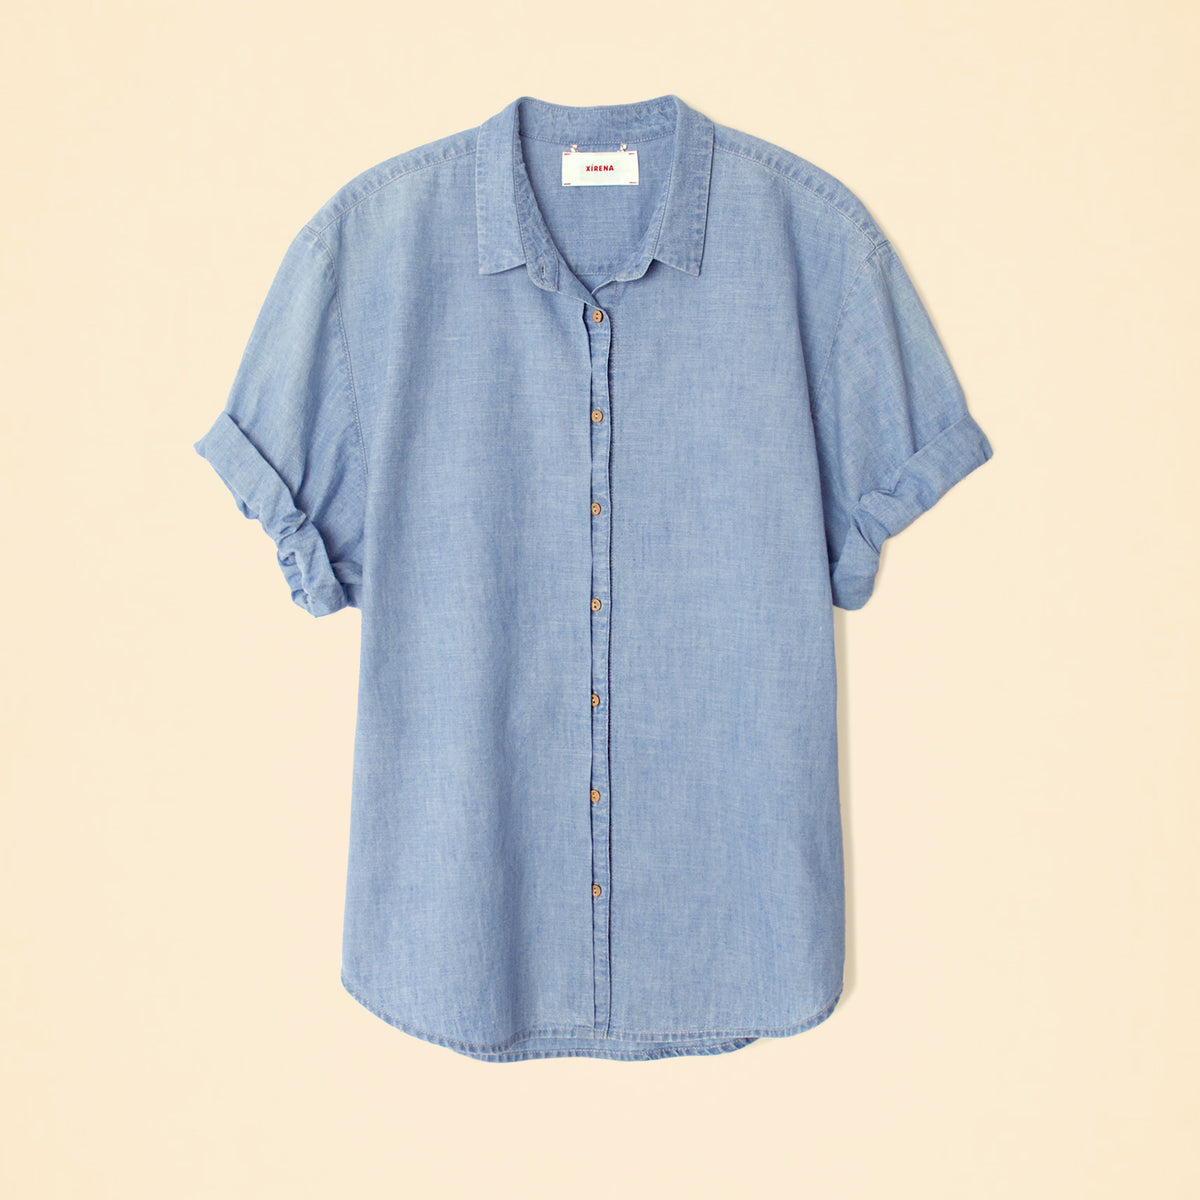 Channing Shirt in Dusty Blue